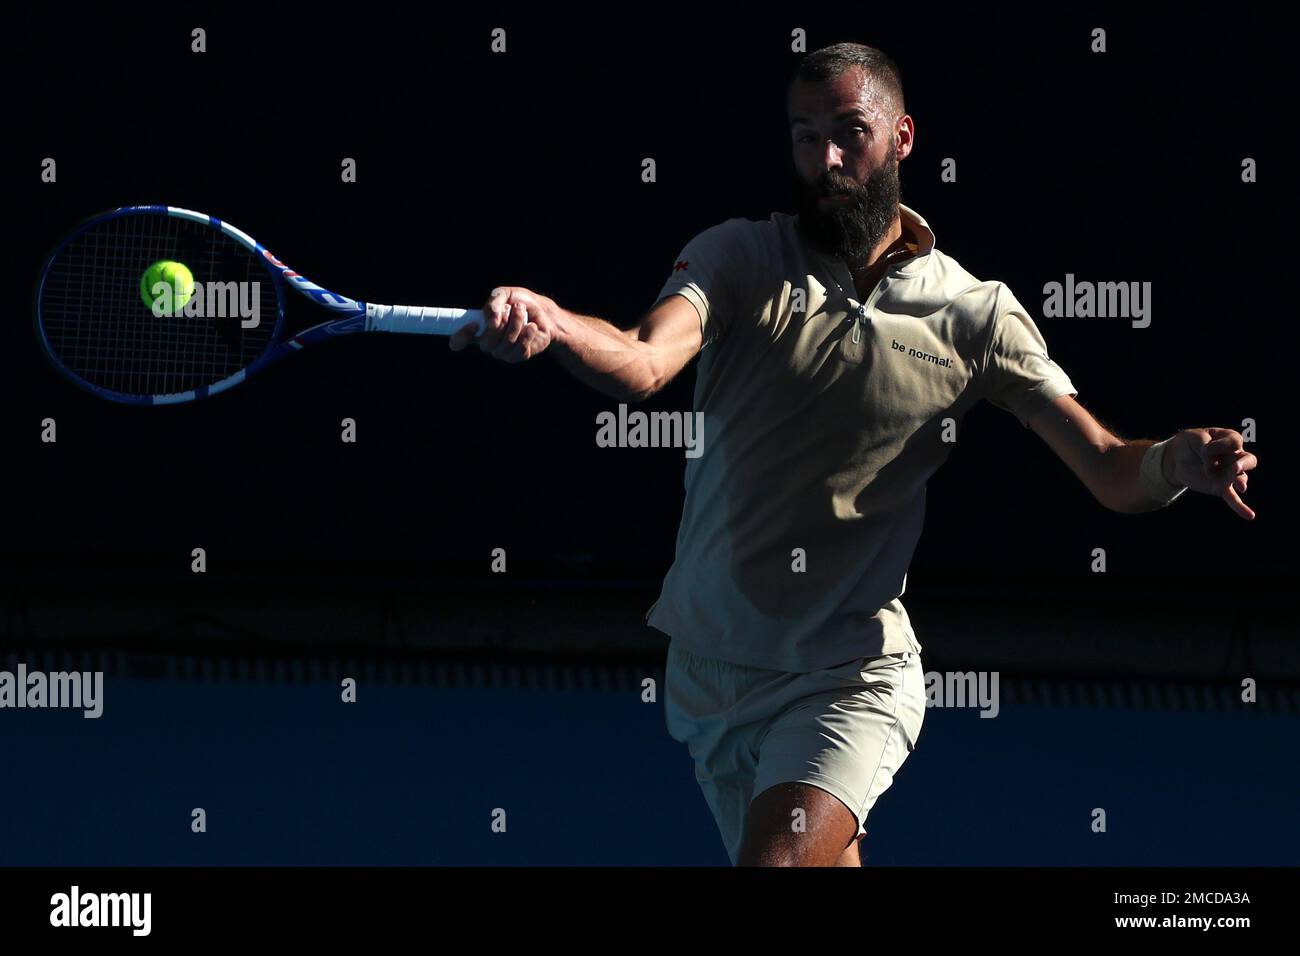 Benoit Paire of France plays a forehand return to Grigor Dimitrov of Bulgaria during their second round match at the Australian Open tennis championships in Melbourne, Australia, Thursday, Jan